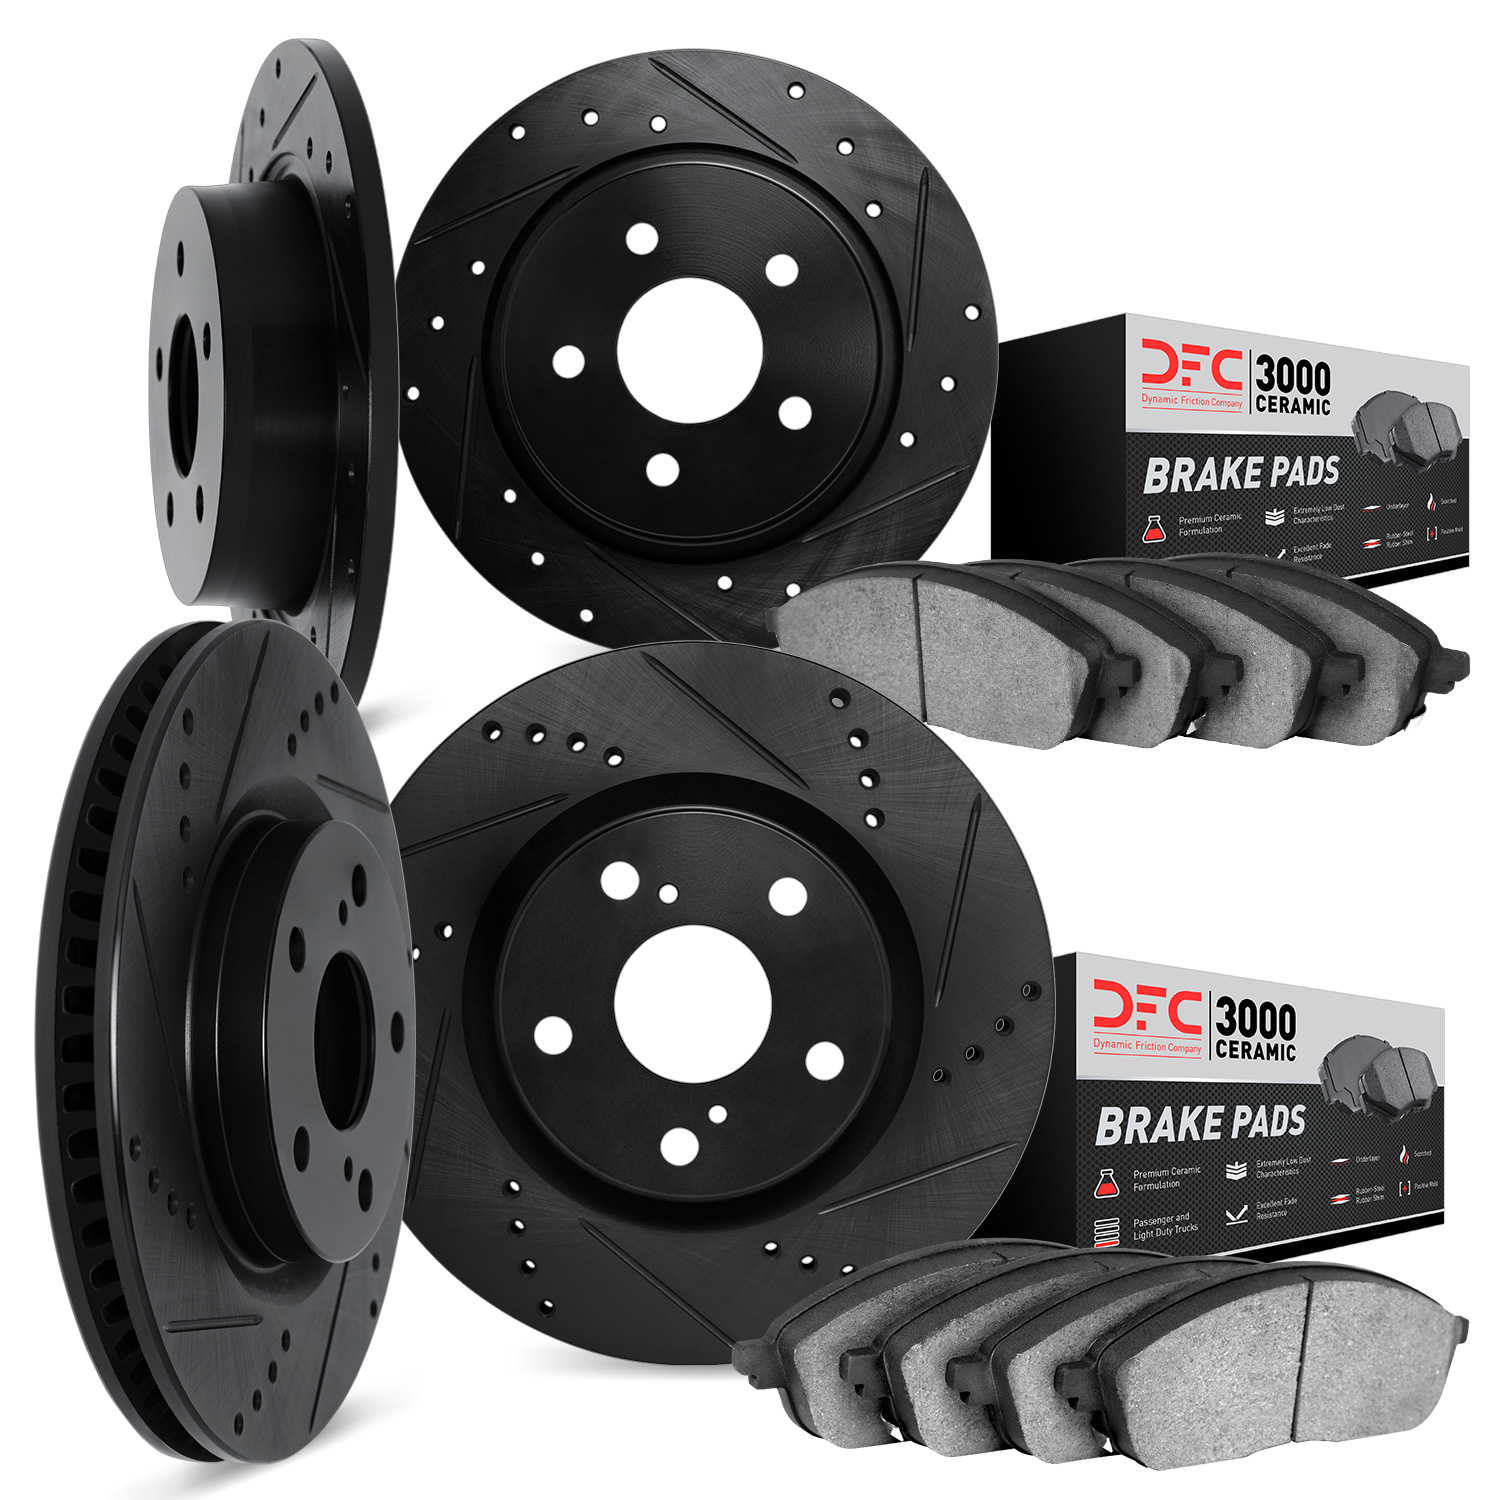 8304-31024 Drilled/Slotted Brake Rotors with 3000-Series Ceramic Brake Pads Kit [Black], 1991-1999 BMW, Position: Front and Rear